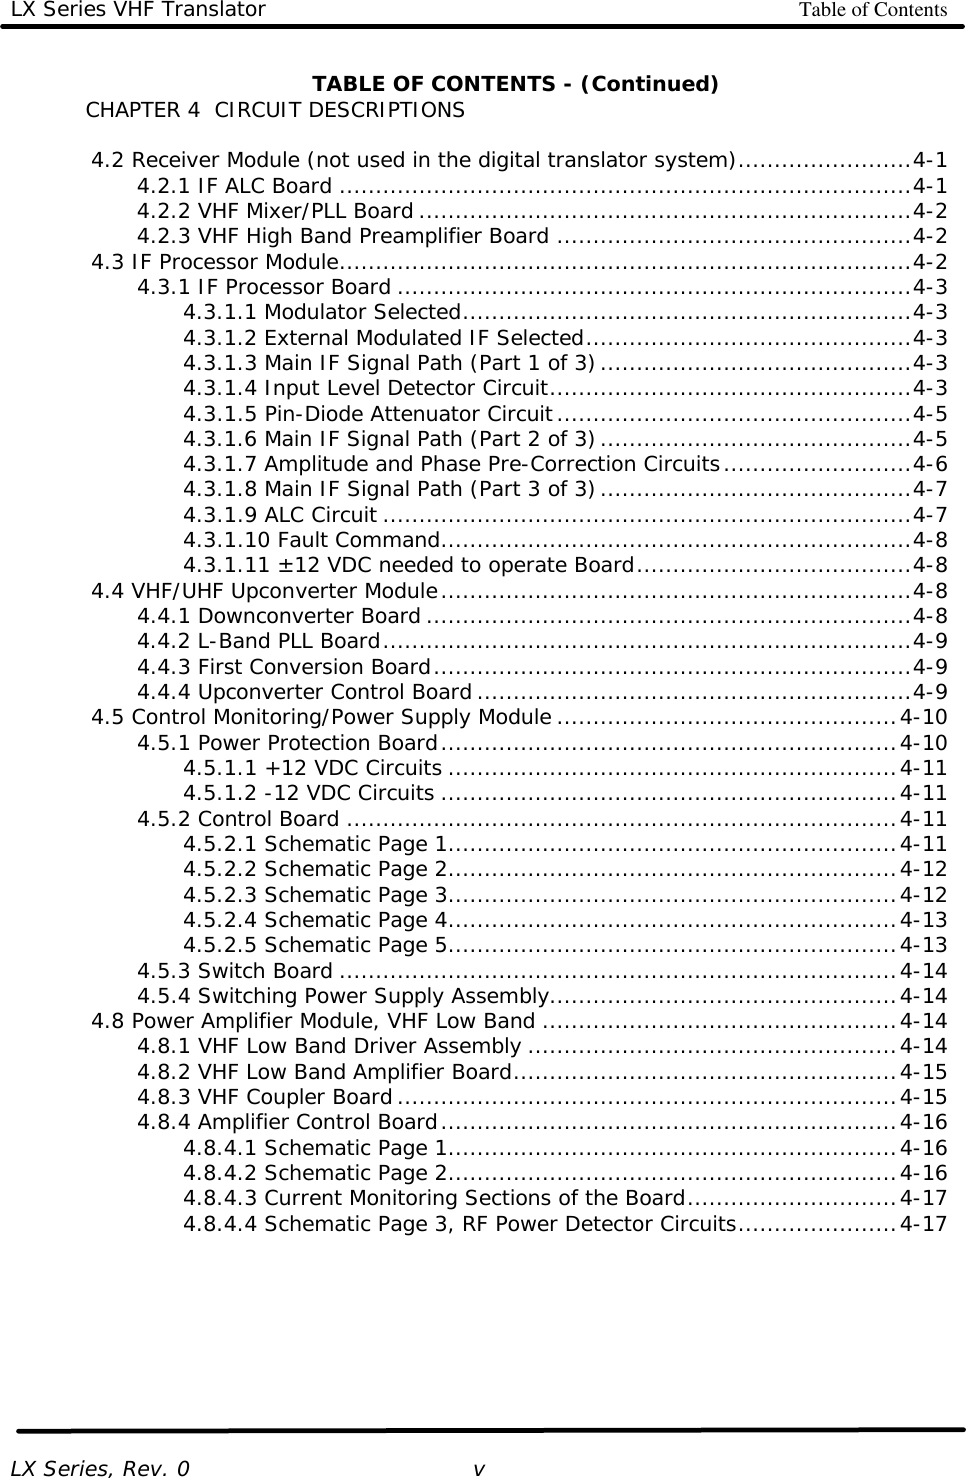 LX Series VHF Translator Table of Contents   LX Series, Rev. 0    v TABLE OF CONTENTS - (Continued) CHAPTER 4  CIRCUIT DESCRIPTIONS   4.2 Receiver Module (not used in the digital translator system)........................4-1     4.2.1 IF ALC Board ...............................................................................4-1     4.2.2 VHF Mixer/PLL Board ....................................................................4-2     4.2.3 VHF High Band Preamplifier Board .................................................4-2  4.3 IF Processor Module...............................................................................4-2     4.3.1 IF Processor Board .......................................................................4-3     4.3.1.1 Modulator Selected..............................................................4-3     4.3.1.2 External Modulated IF Selected.............................................4-3     4.3.1.3 Main IF Signal Path (Part 1 of 3)...........................................4-3     4.3.1.4 Input Level Detector Circuit..................................................4-3     4.3.1.5 Pin-Diode Attenuator Circuit.................................................4-5     4.3.1.6 Main IF Signal Path (Part 2 of 3)...........................................4-5     4.3.1.7 Amplitude and Phase Pre-Correction Circuits..........................4-6     4.3.1.8 Main IF Signal Path (Part 3 of 3)...........................................4-7     4.3.1.9 ALC Circuit .........................................................................4-7     4.3.1.10 Fault Command.................................................................4-8     4.3.1.11 ±12 VDC needed to operate Board......................................4-8  4.4 VHF/UHF Upconverter Module.................................................................4-8     4.4.1 Downconverter Board ...................................................................4-8     4.4.2 L-Band PLL Board.........................................................................4-9     4.4.3 First Conversion Board..................................................................4-9     4.4.4 Upconverter Control Board ............................................................4-9  4.5 Control Monitoring/Power Supply Module ...............................................4-10     4.5.1 Power Protection Board...............................................................4-10     4.5.1.1 +12 VDC Circuits ..............................................................4-11     4.5.1.2 -12 VDC Circuits ...............................................................4-11     4.5.2 Control Board ............................................................................4-11     4.5.2.1 Schematic Page 1..............................................................4-11     4.5.2.2 Schematic Page 2..............................................................4-12     4.5.2.3 Schematic Page 3..............................................................4-12     4.5.2.4 Schematic Page 4..............................................................4-13     4.5.2.5 Schematic Page 5..............................................................4-13     4.5.3 Switch Board .............................................................................4-14     4.5.4 Switching Power Supply Assembly................................................4-14  4.8 Power Amplifier Module, VHF Low Band .................................................4-14     4.8.1 VHF Low Band Driver Assembly ...................................................4-14     4.8.2 VHF Low Band Amplifier Board.....................................................4-15     4.8.3 VHF Coupler Board .....................................................................4-15     4.8.4 Amplifier Control Board...............................................................4-16     4.8.4.1 Schematic Page 1..............................................................4-16     4.8.4.2 Schematic Page 2..............................................................4-16     4.8.4.3 Current Monitoring Sections of the Board.............................4-17     4.8.4.4 Schematic Page 3, RF Power Detector Circuits......................4-17       